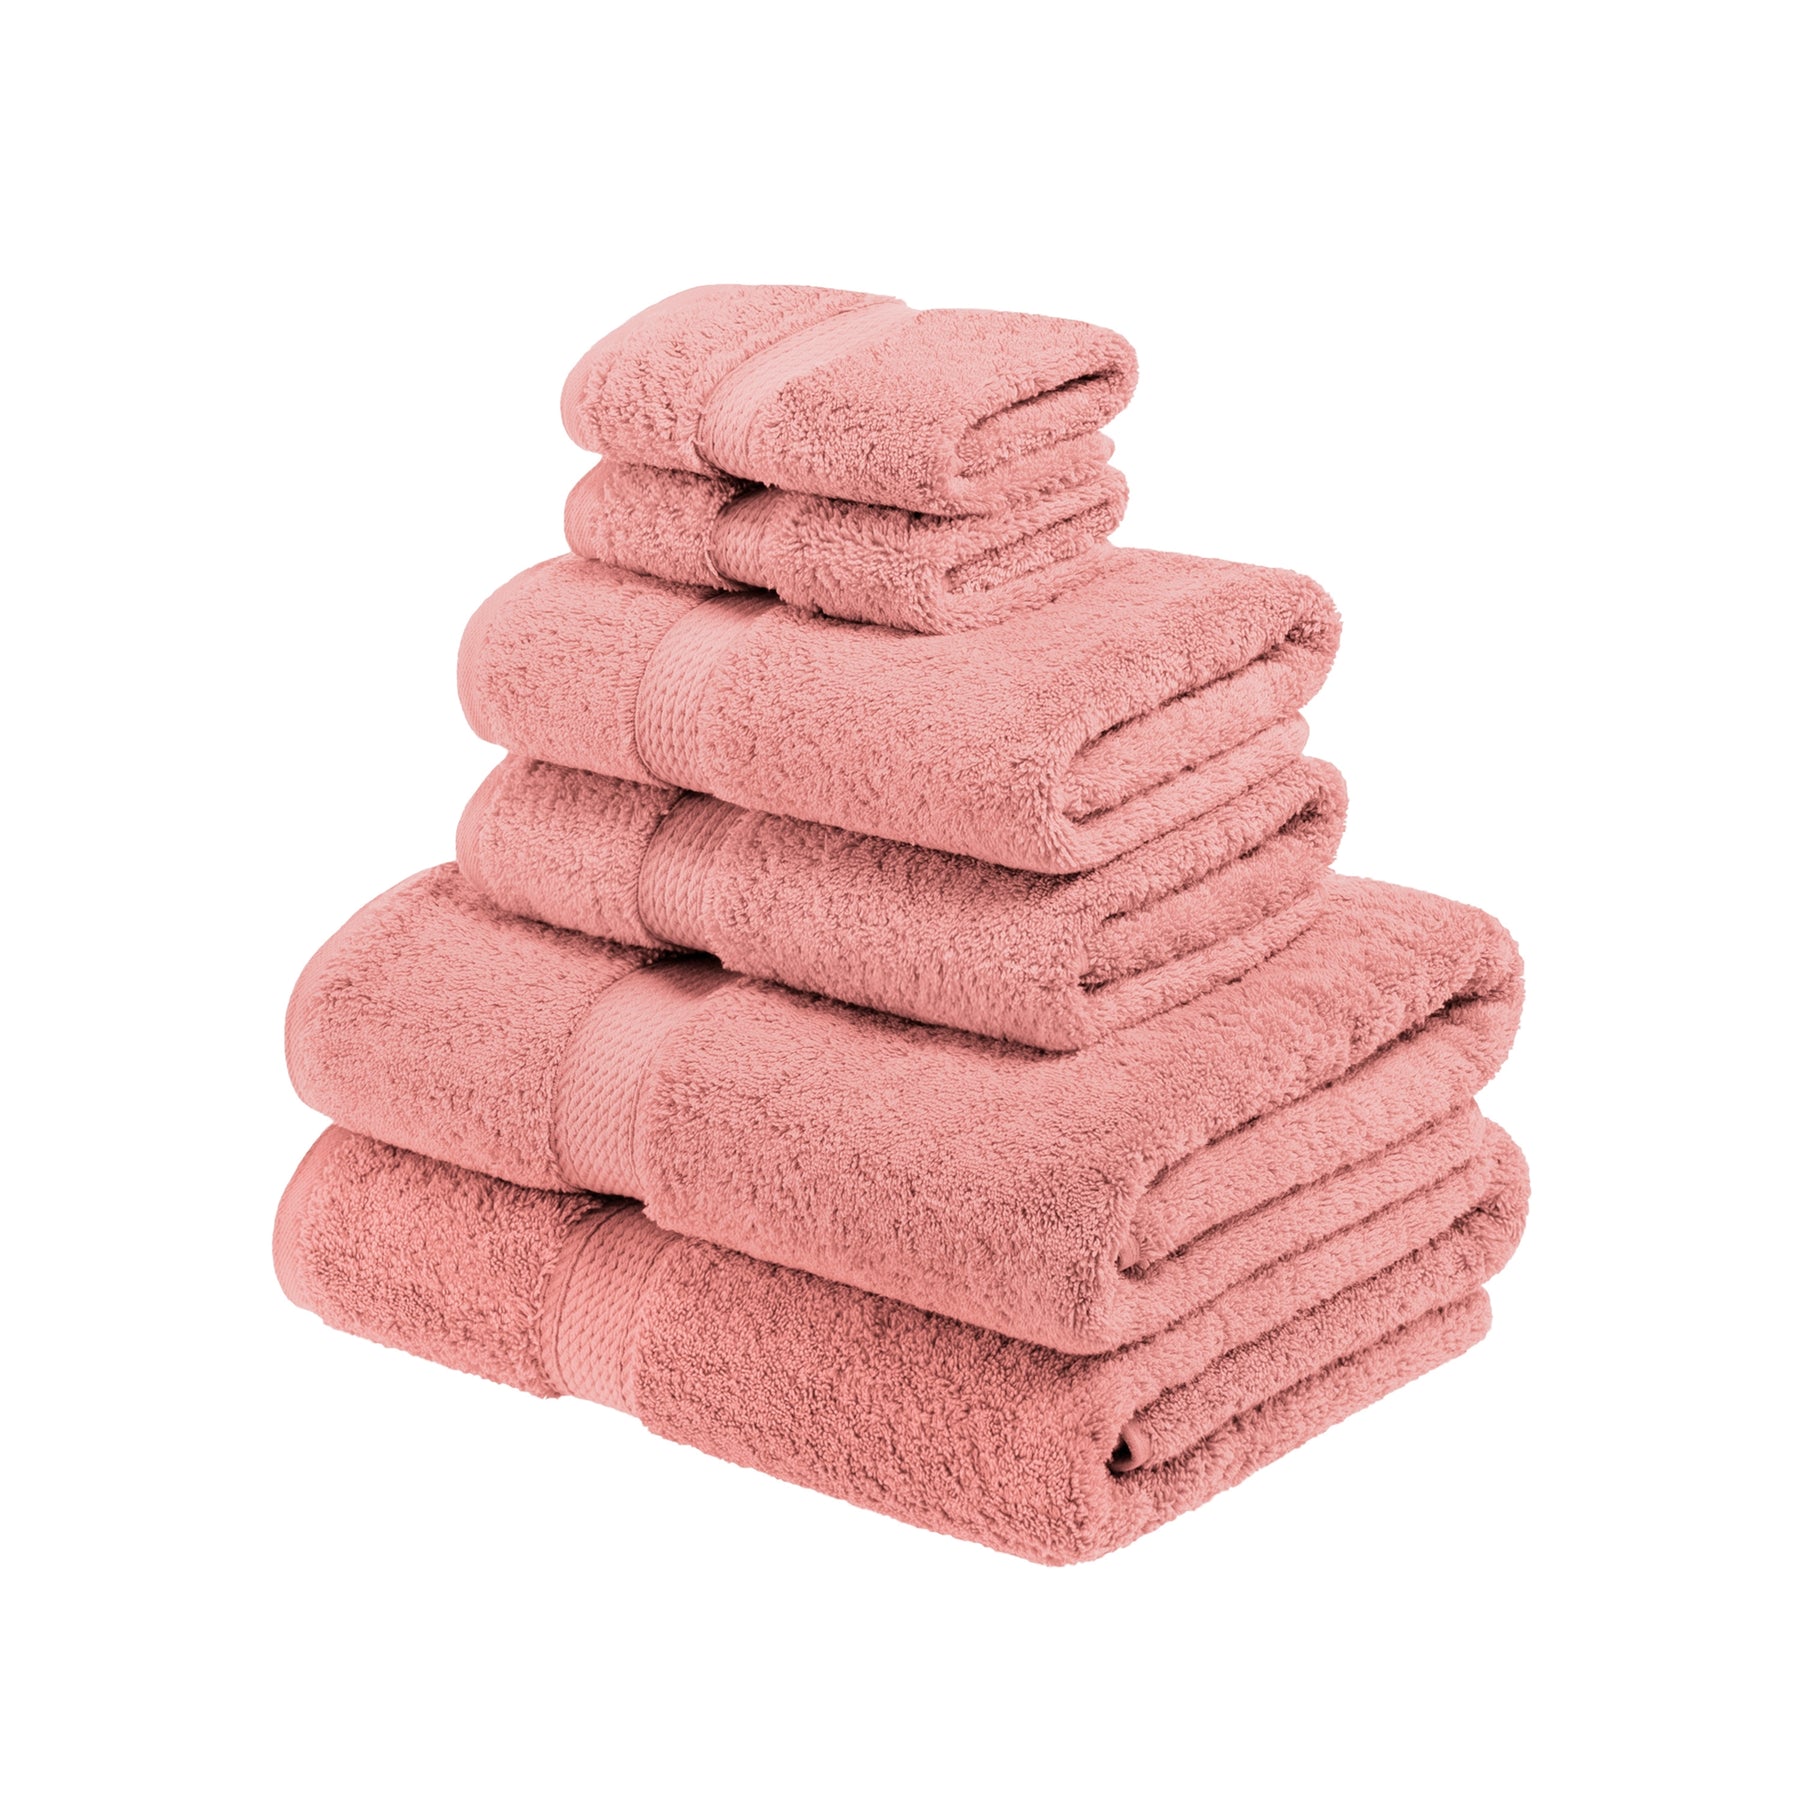 Buy Dusky Pink Egyptian Cotton Towel from Next USA